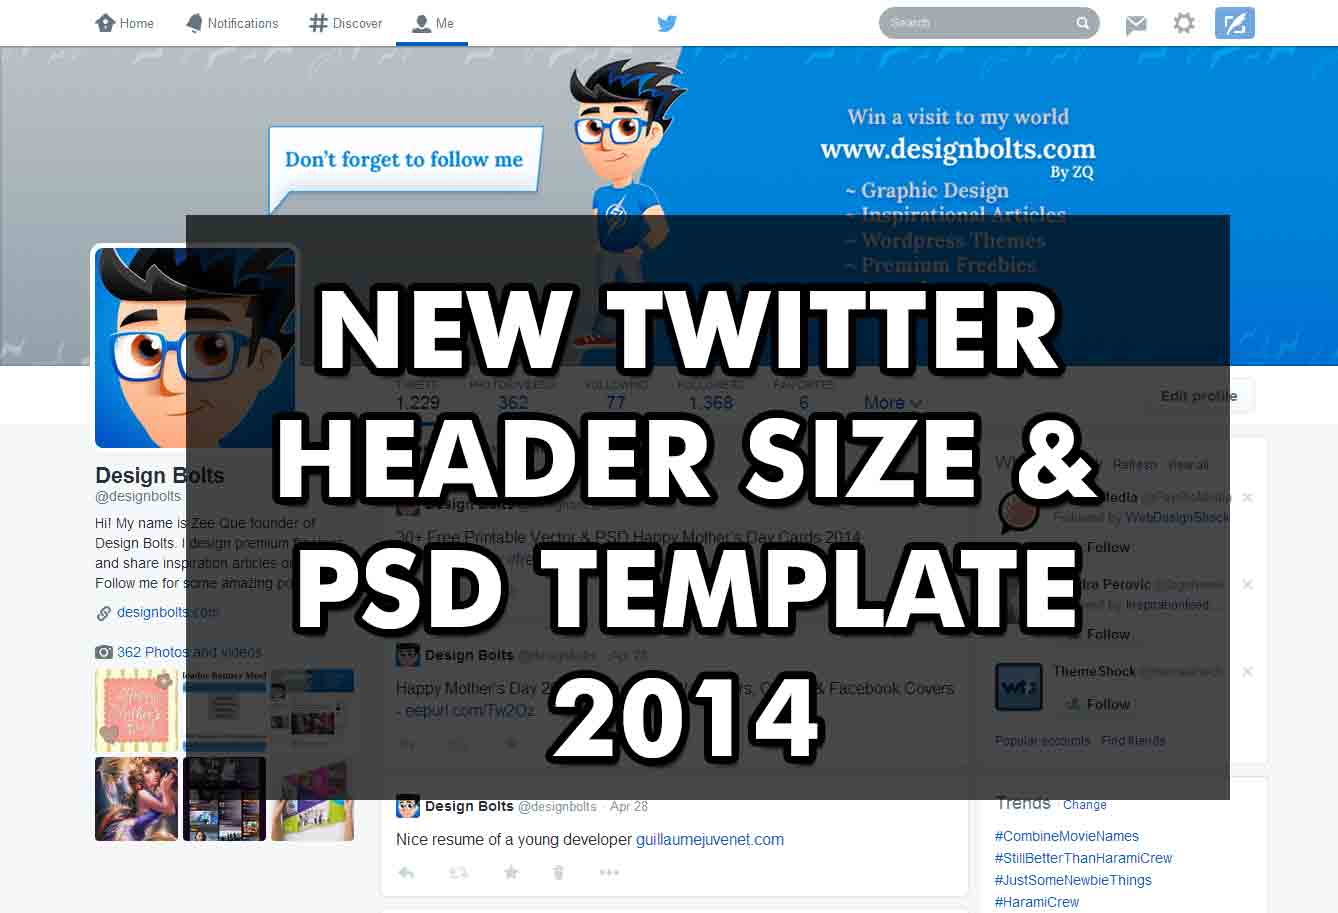 Twitter Banner Size Template